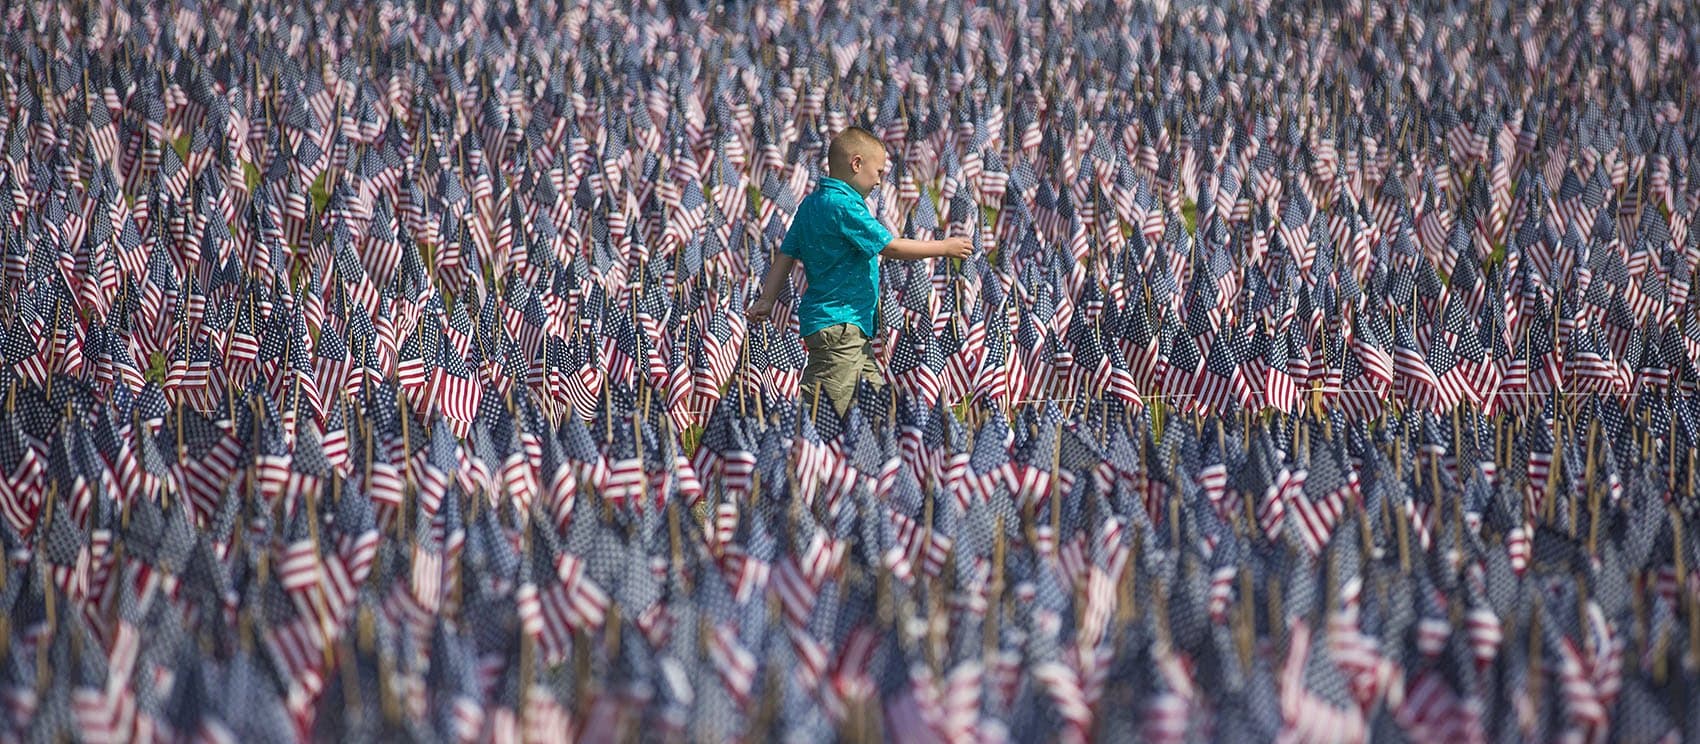 A young boy walks down the path through the annual Memorial Day flag garden on the Boston Common. (Jesse Costa/WBUR)